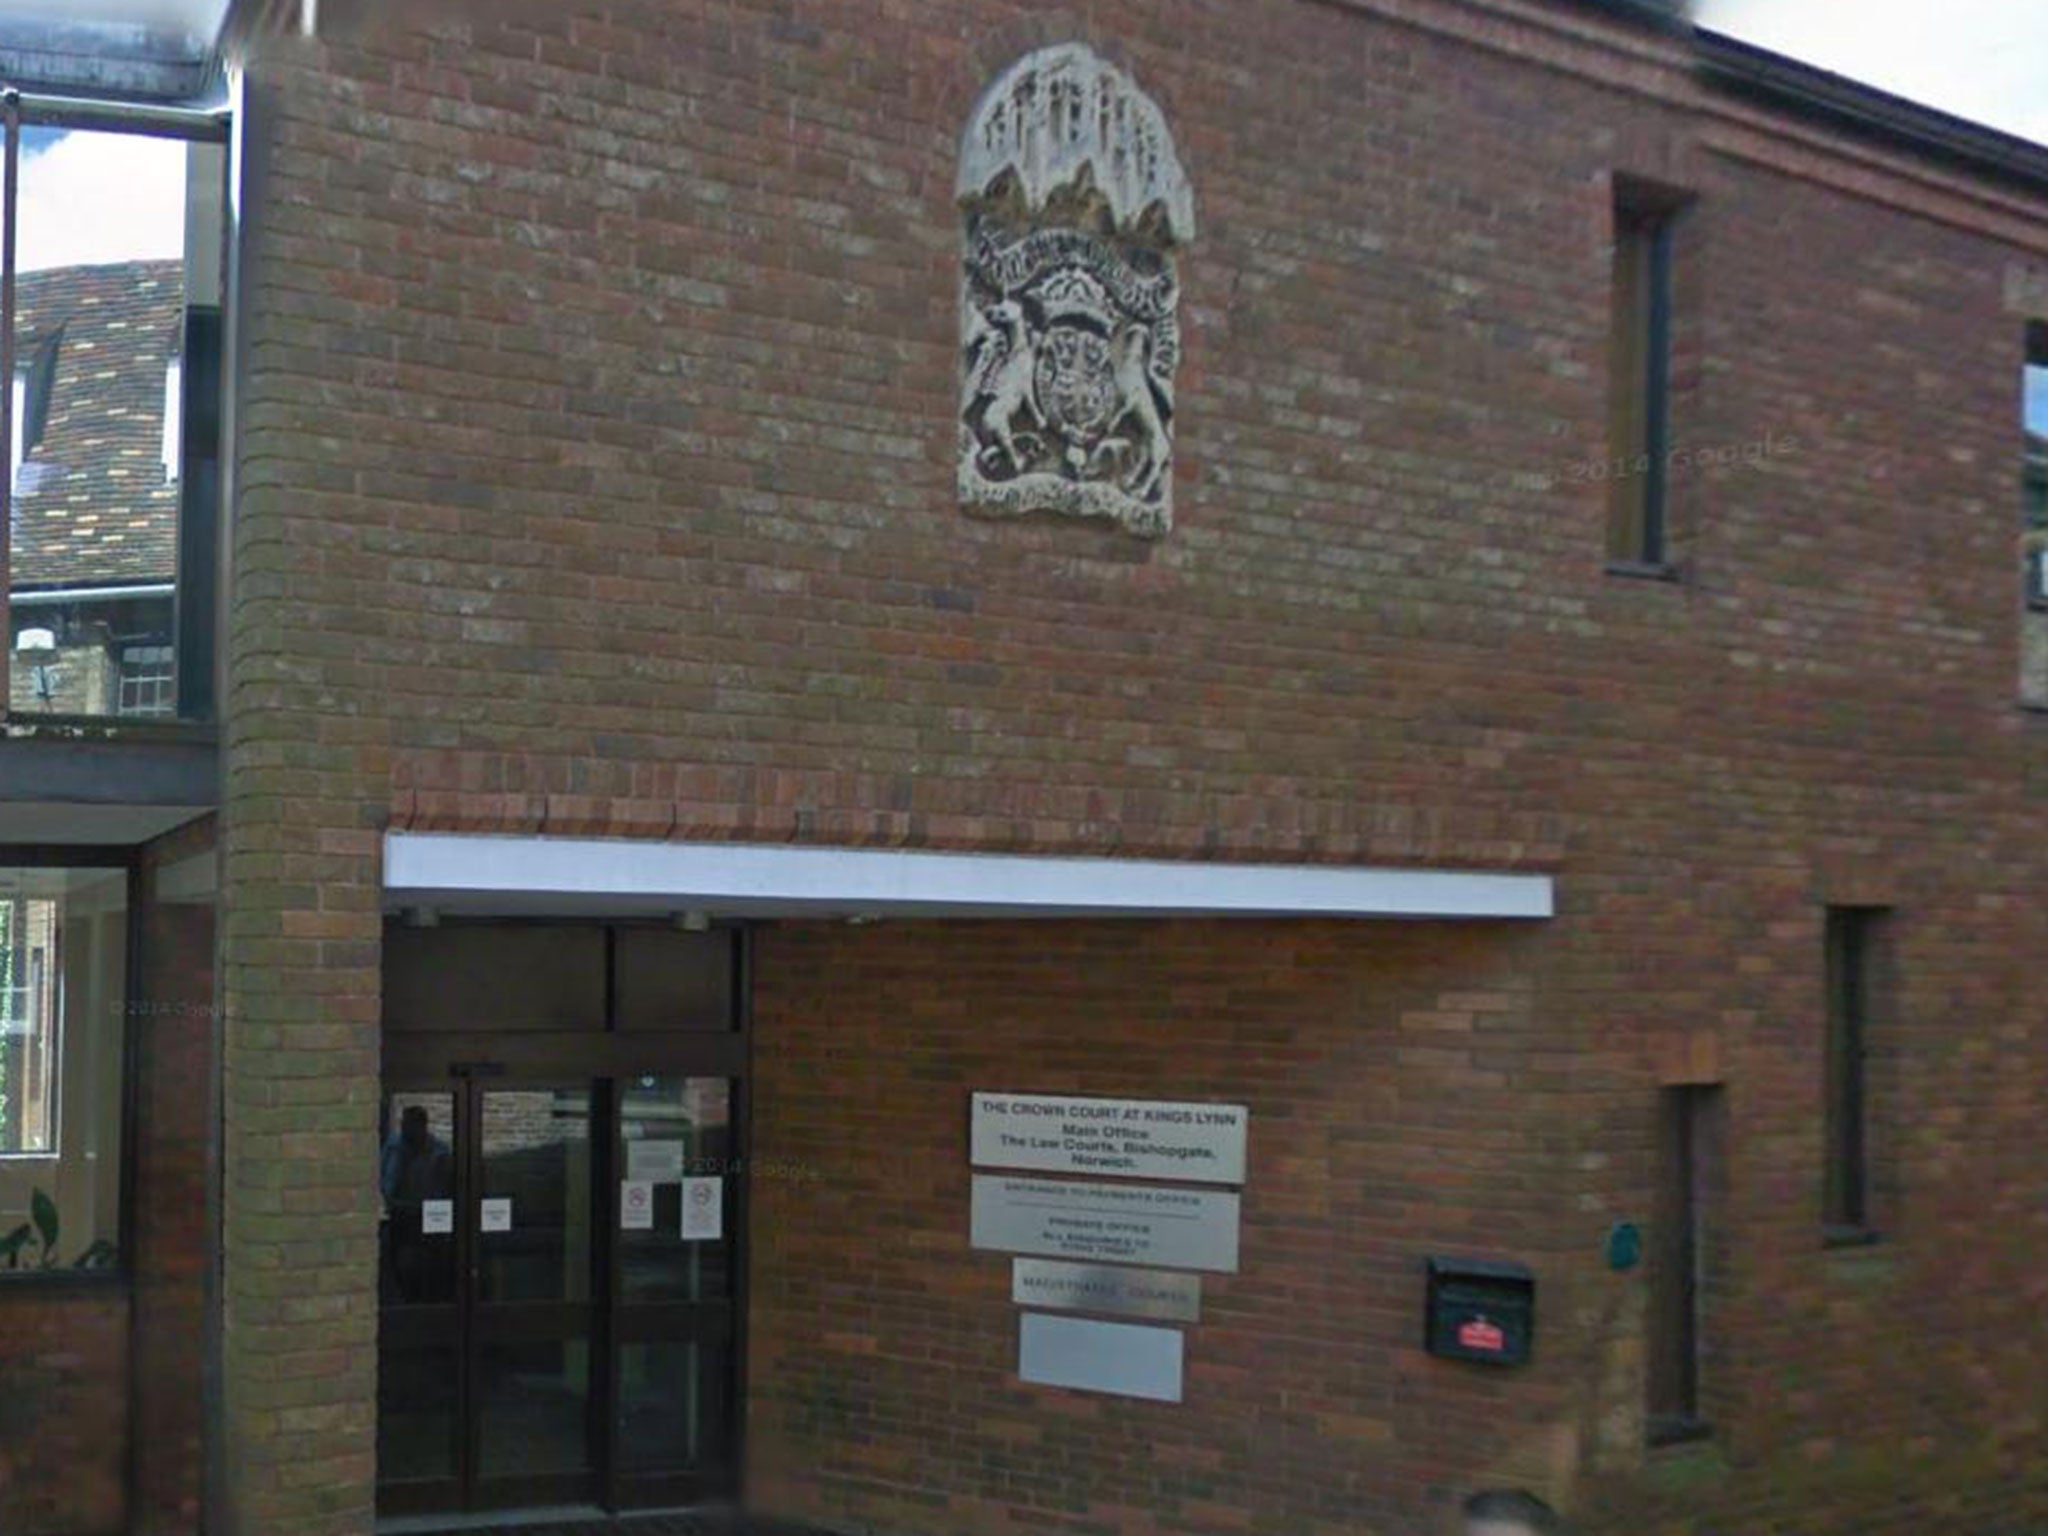 The case is being heard at King's Lynn Crown Court